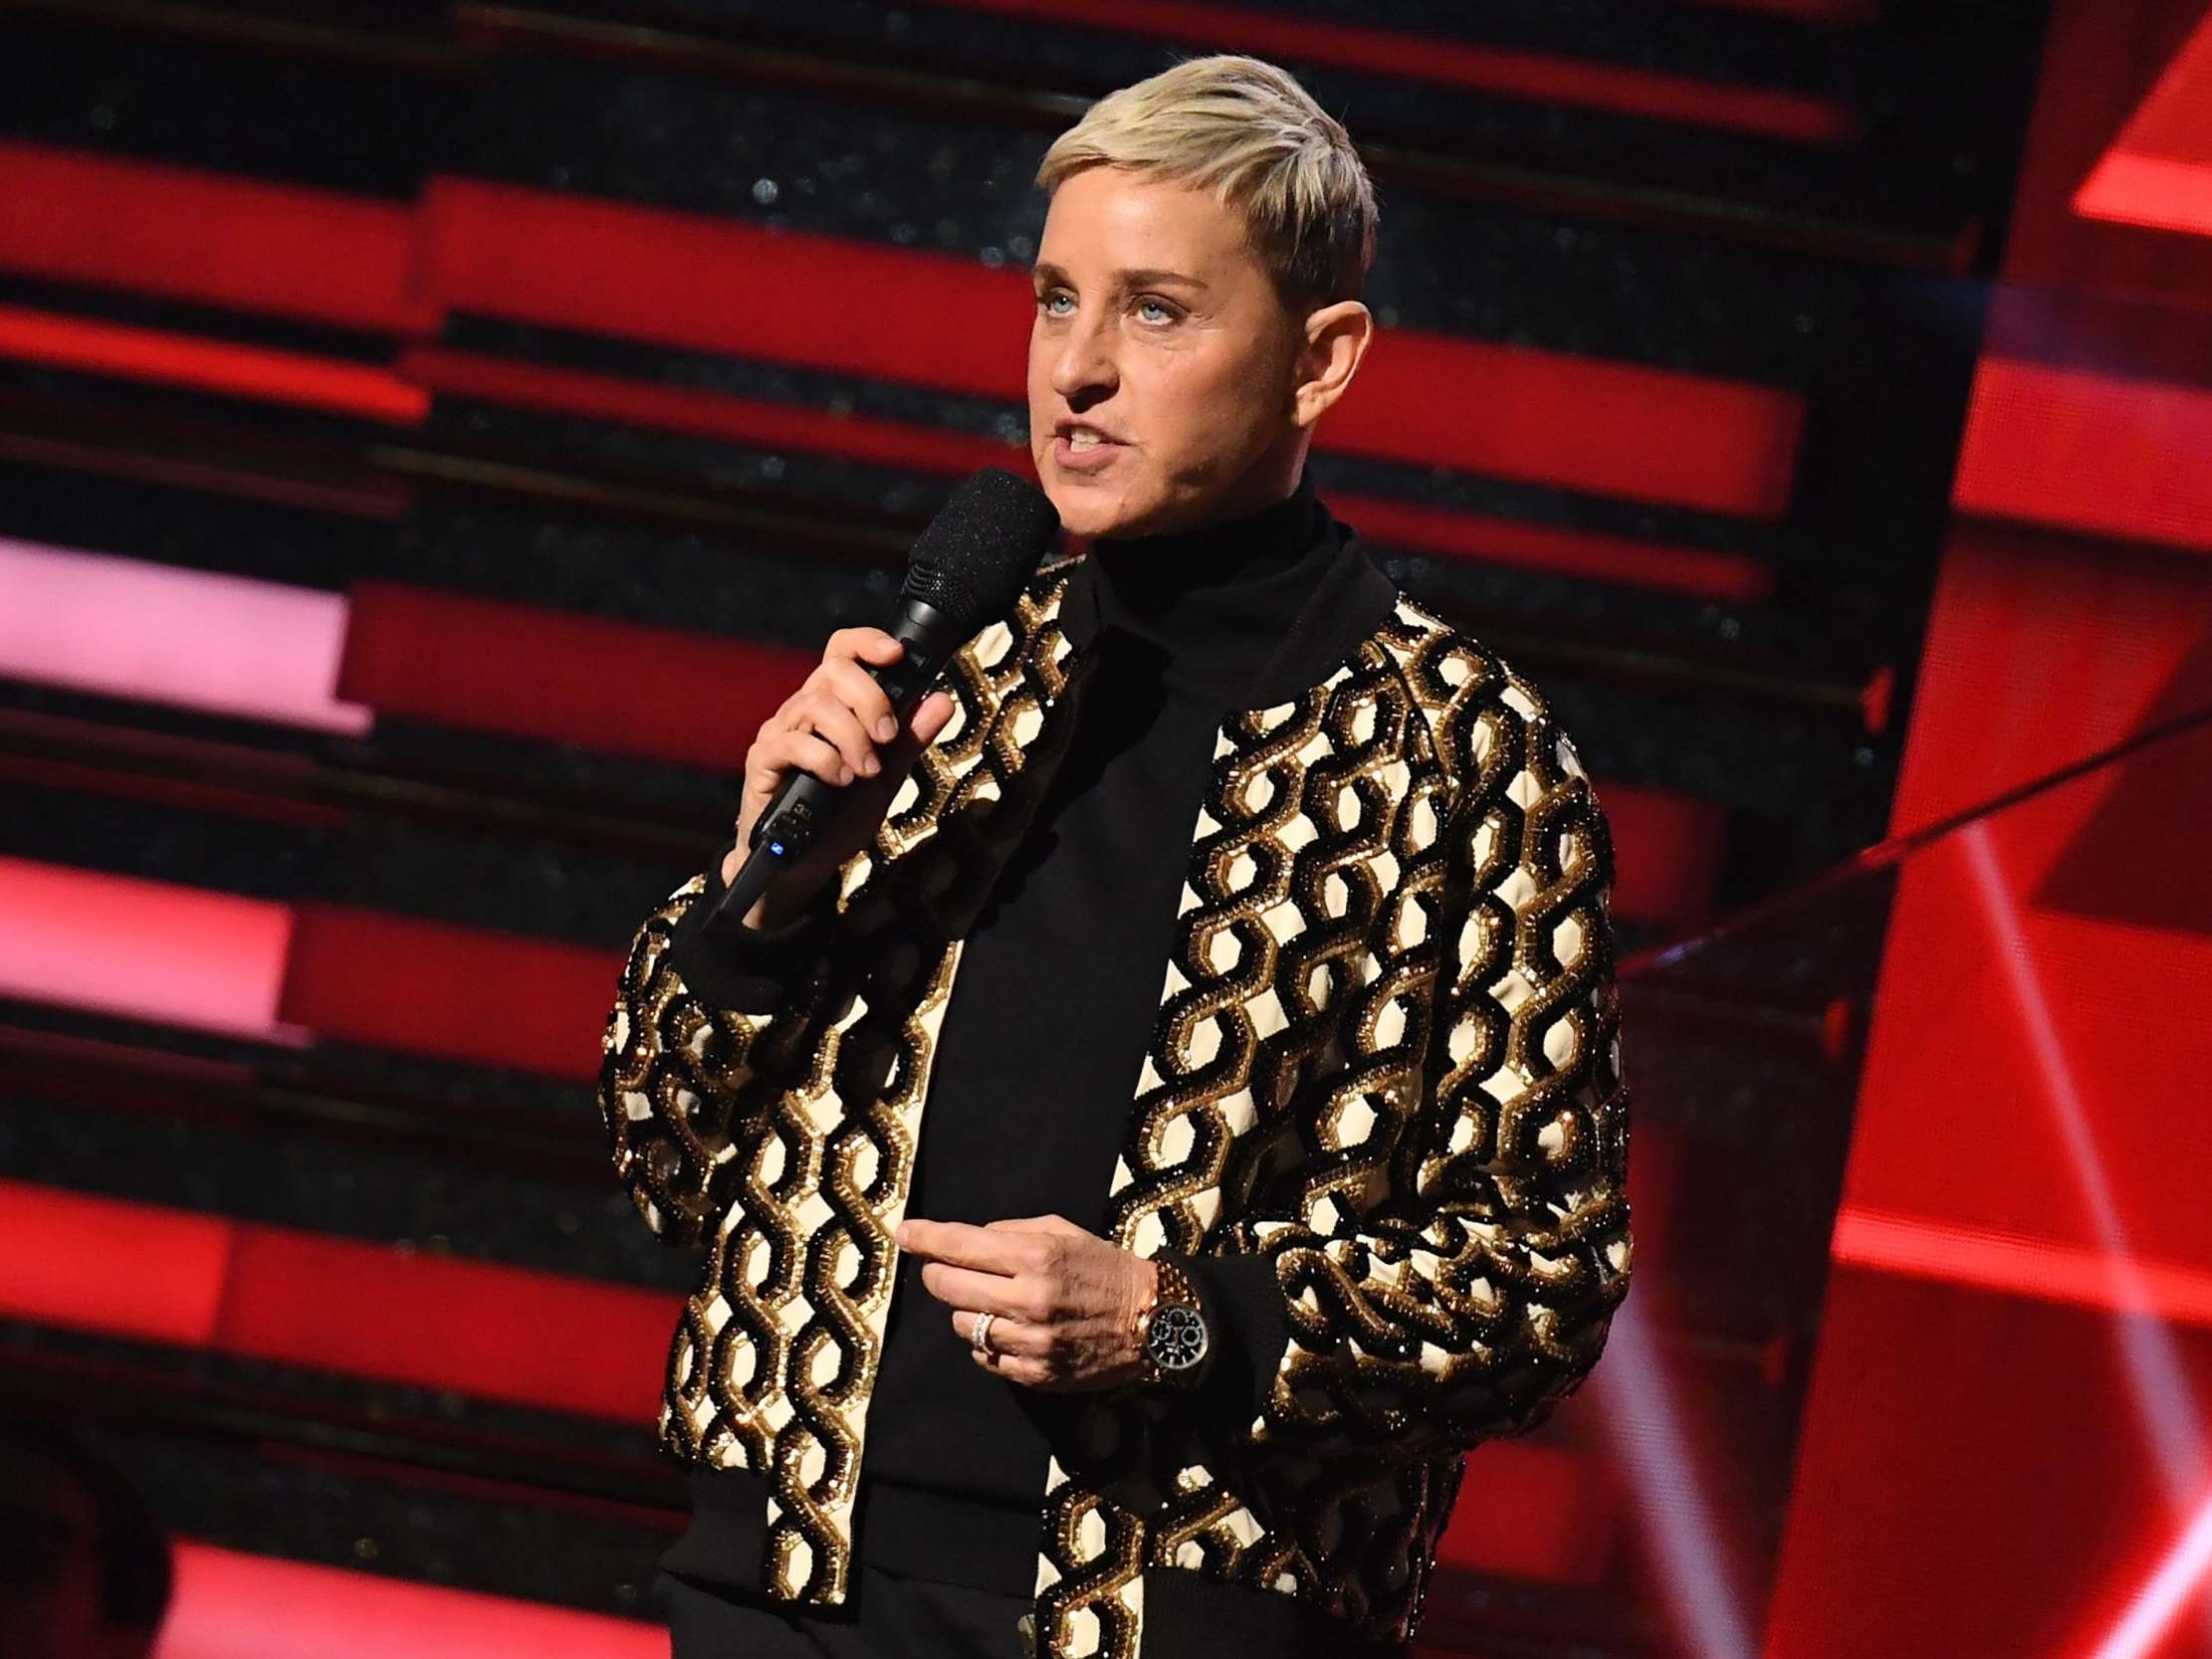 Ellen DeGeneres ‘ready to quit show’ over claims of workplace bullying and harassment